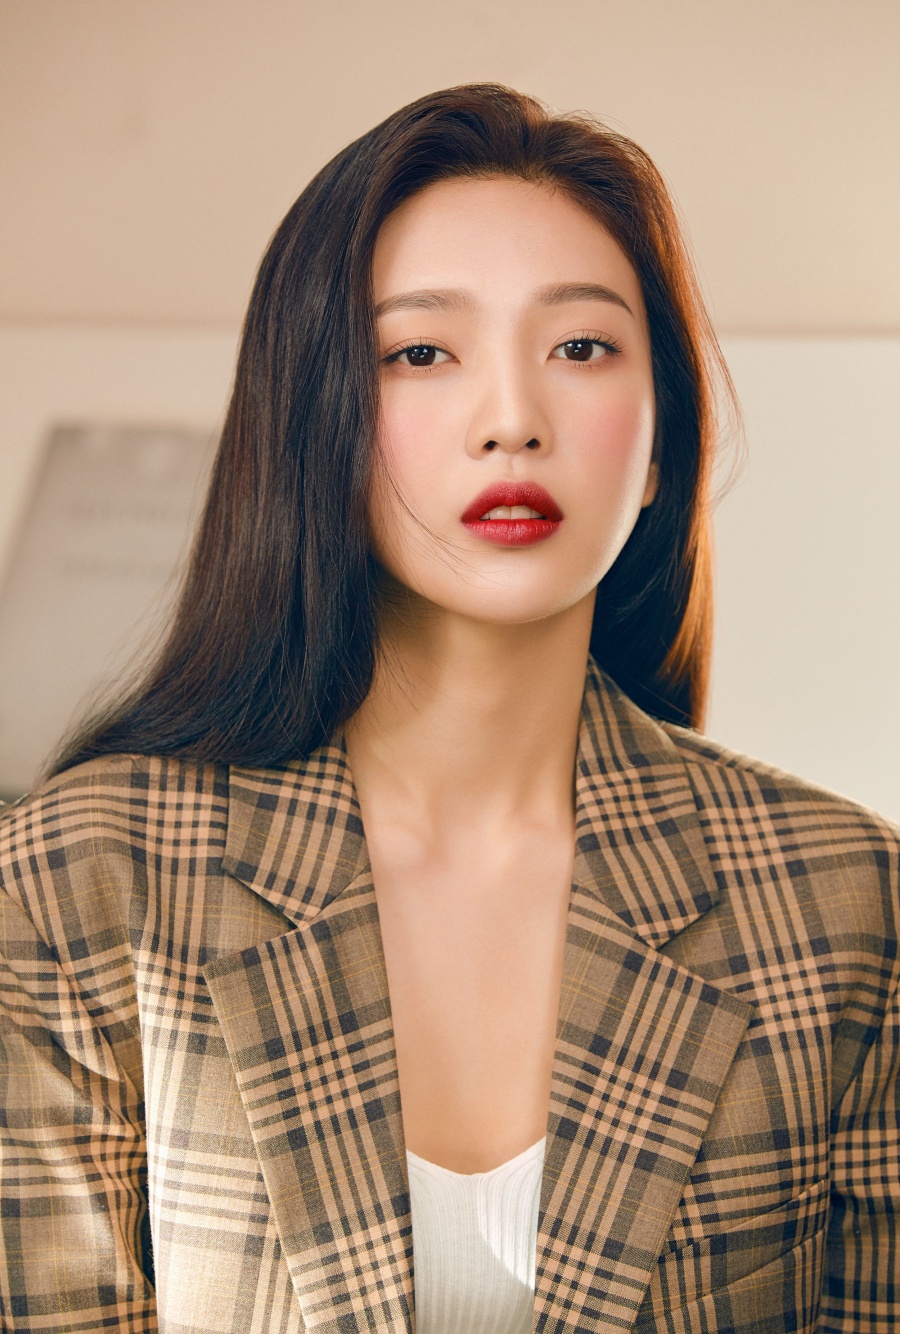 Group Red Velvet Joy has released an atmosphere of autumn pictorials.On the 19th, In Please Like released a picture with Joy and showed autumn makeup.Joy in the public picture produced a feminine yet mature atmosphere with styling that shows off his eyes and elegance.Joy, in particular, caught his eye with a moist, shiny skin without flaws.Red Velvets new mini-album The Reeve Festival Day 2 features six songs from various genres including the title song Sonic Wave and will be released on various music sites at 6 pm on the 20th.